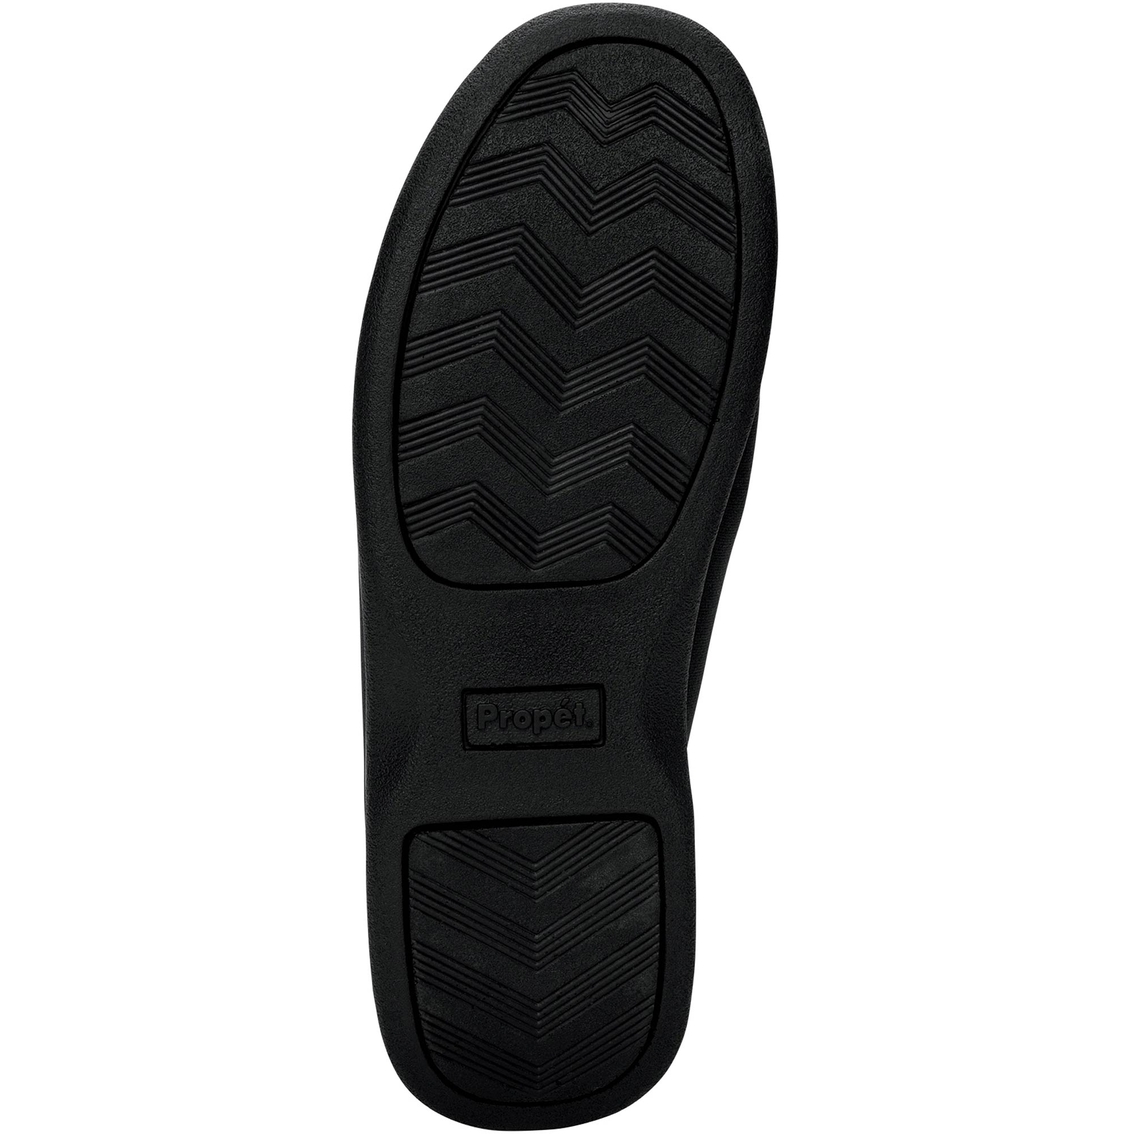 Propet Men's Cush N Foot Stretchable and Adjustable A5500 Shoes - Image 4 of 4